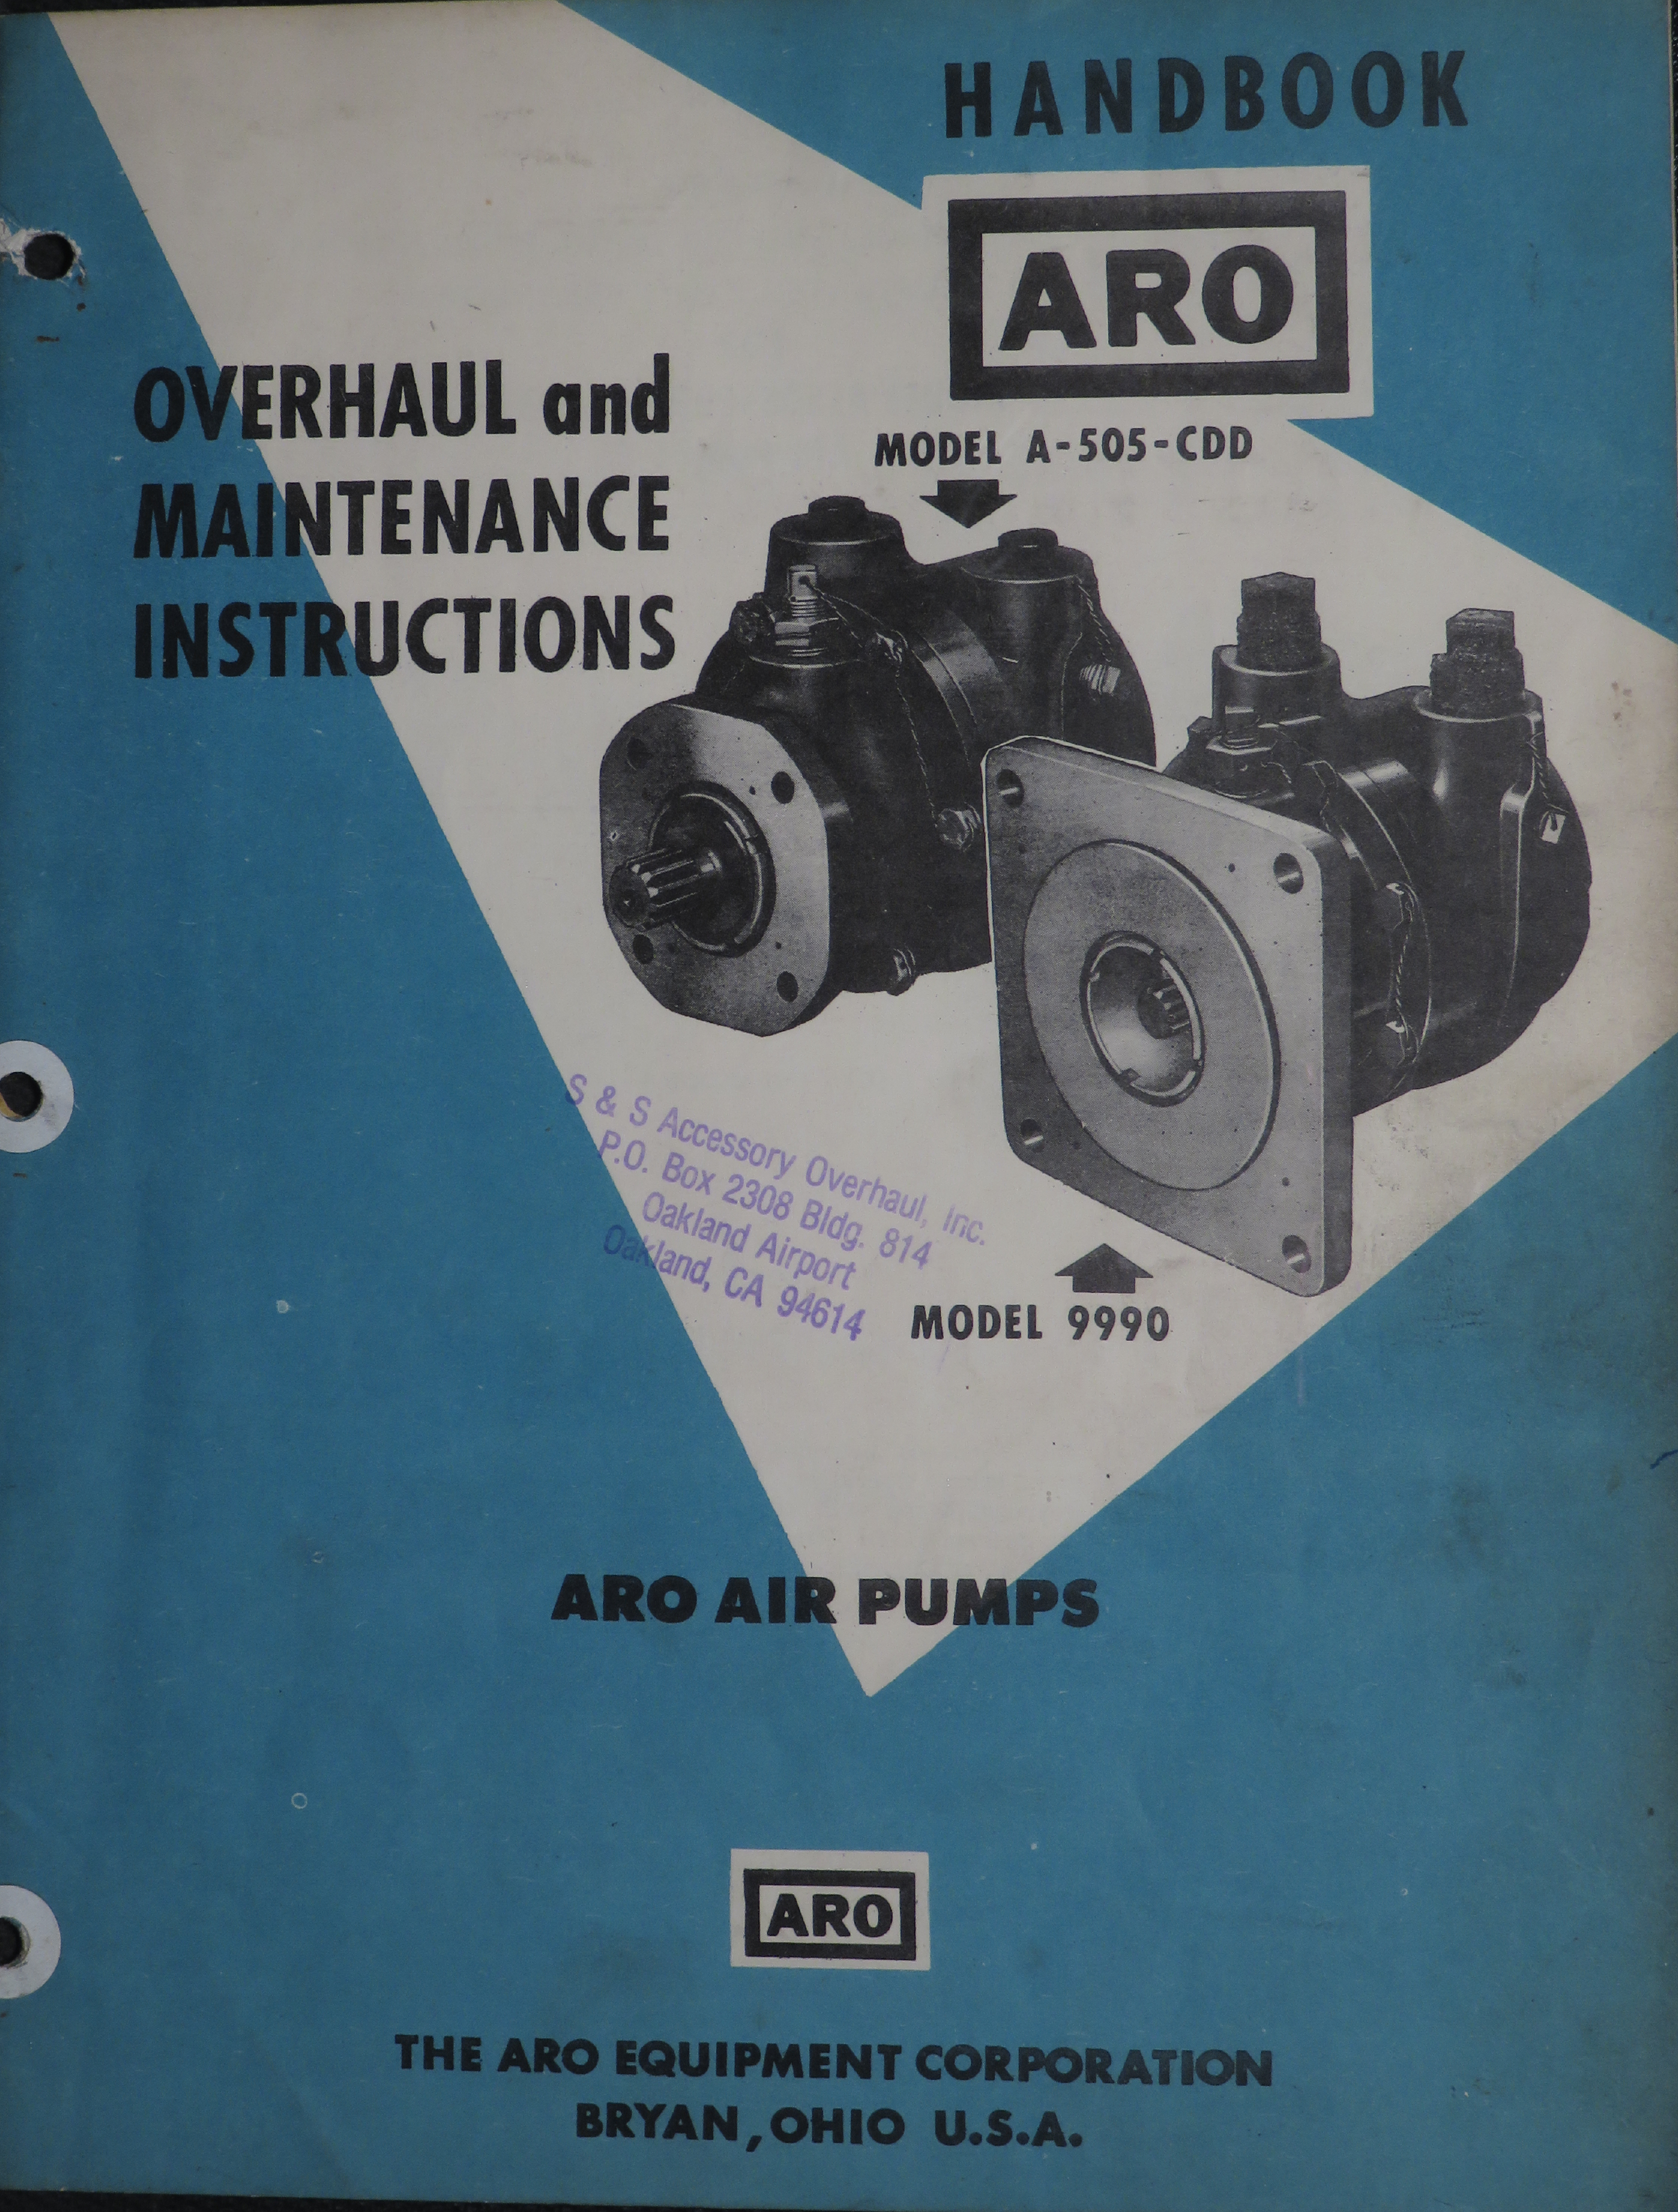 Sample page 1 from AirCorps Library document: Overhaul and Maintenance Instructions for Air Pumps - Models  A-505-CDD and 9990